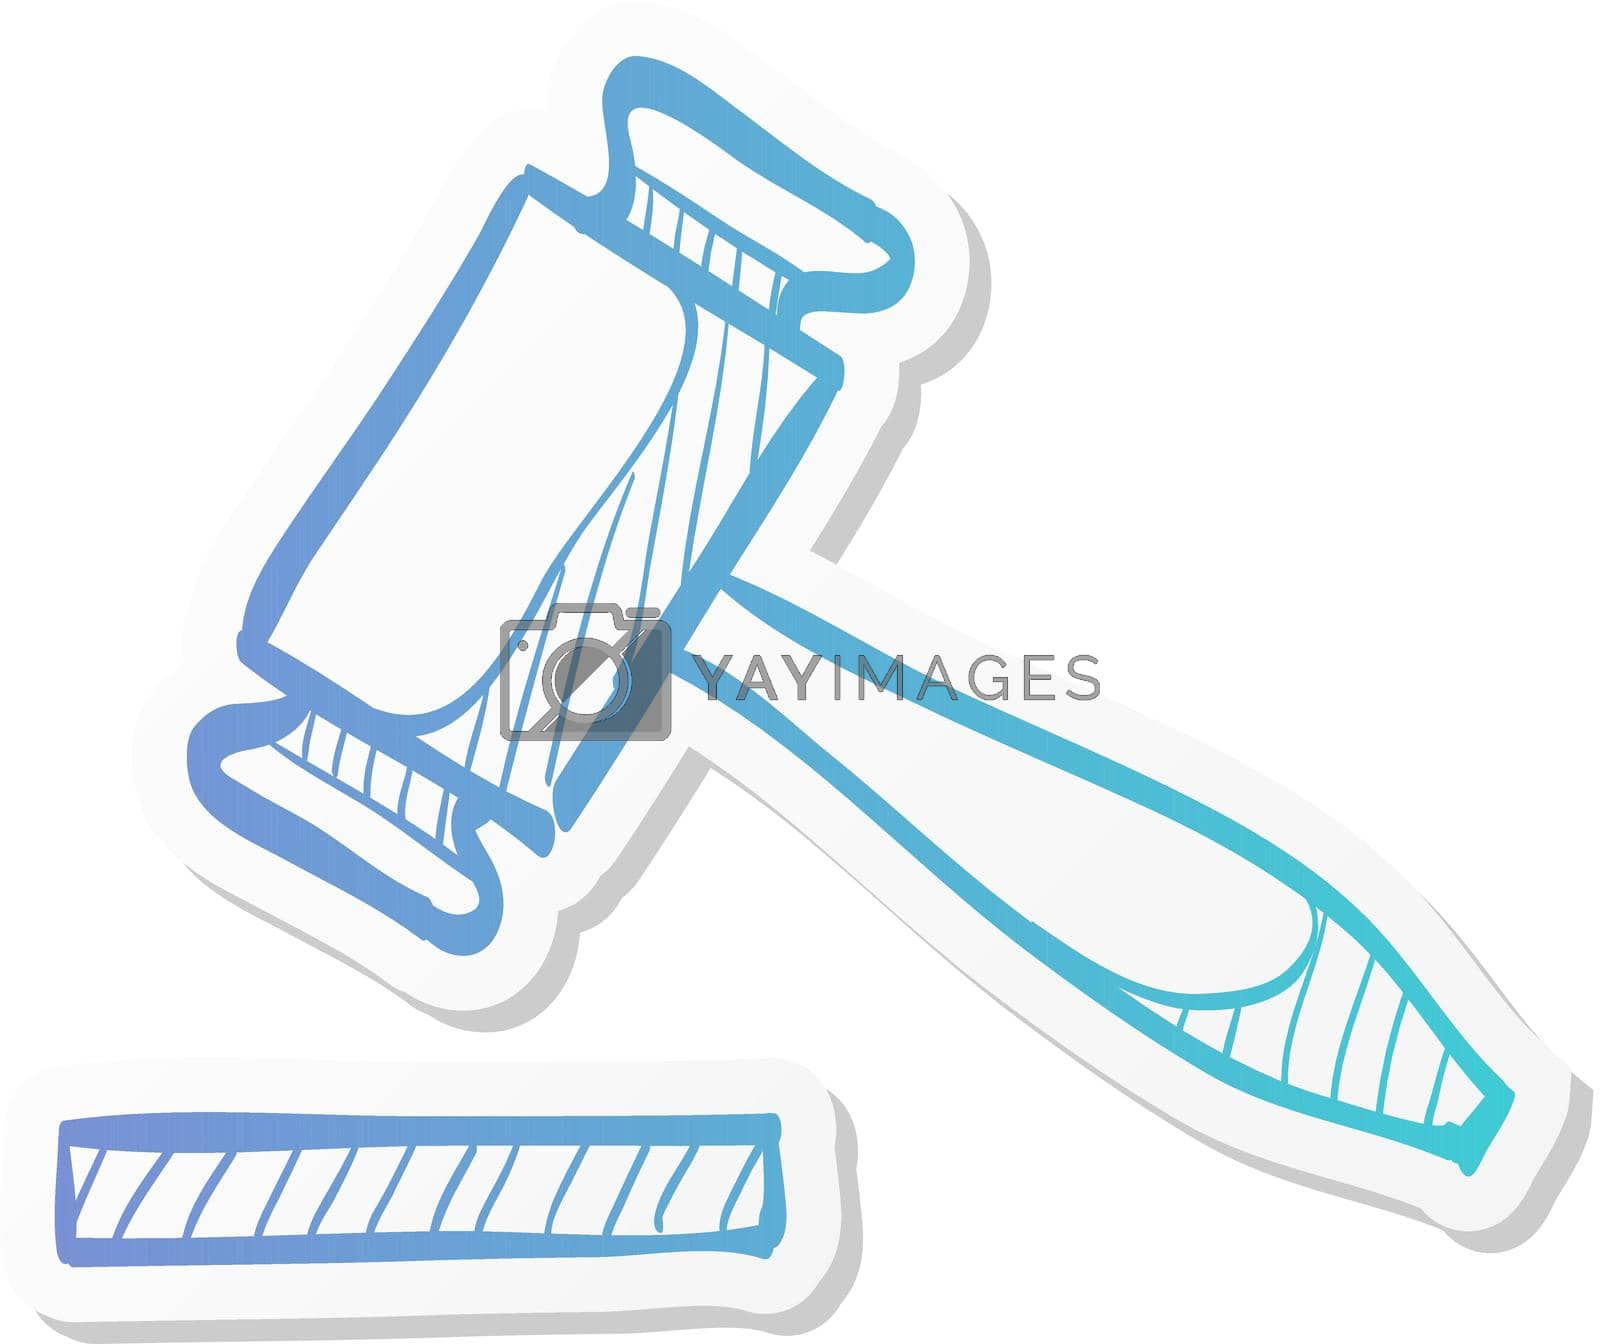 Royalty free image of Sticker style icon - Wood hammer by puruan